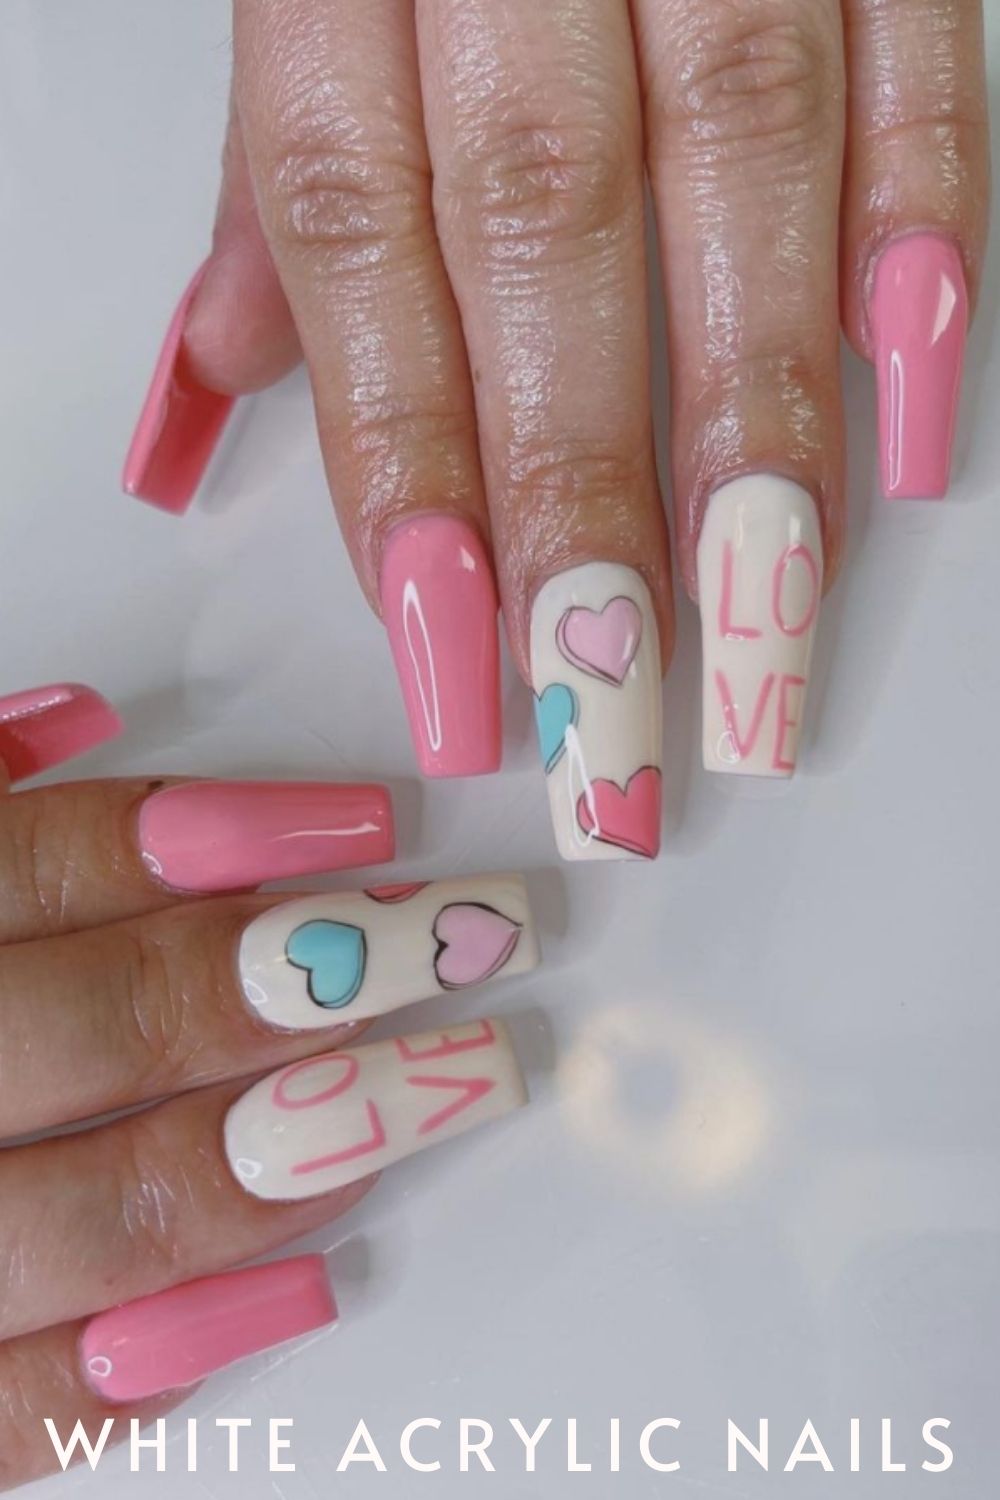 Pink and white ombre nails art